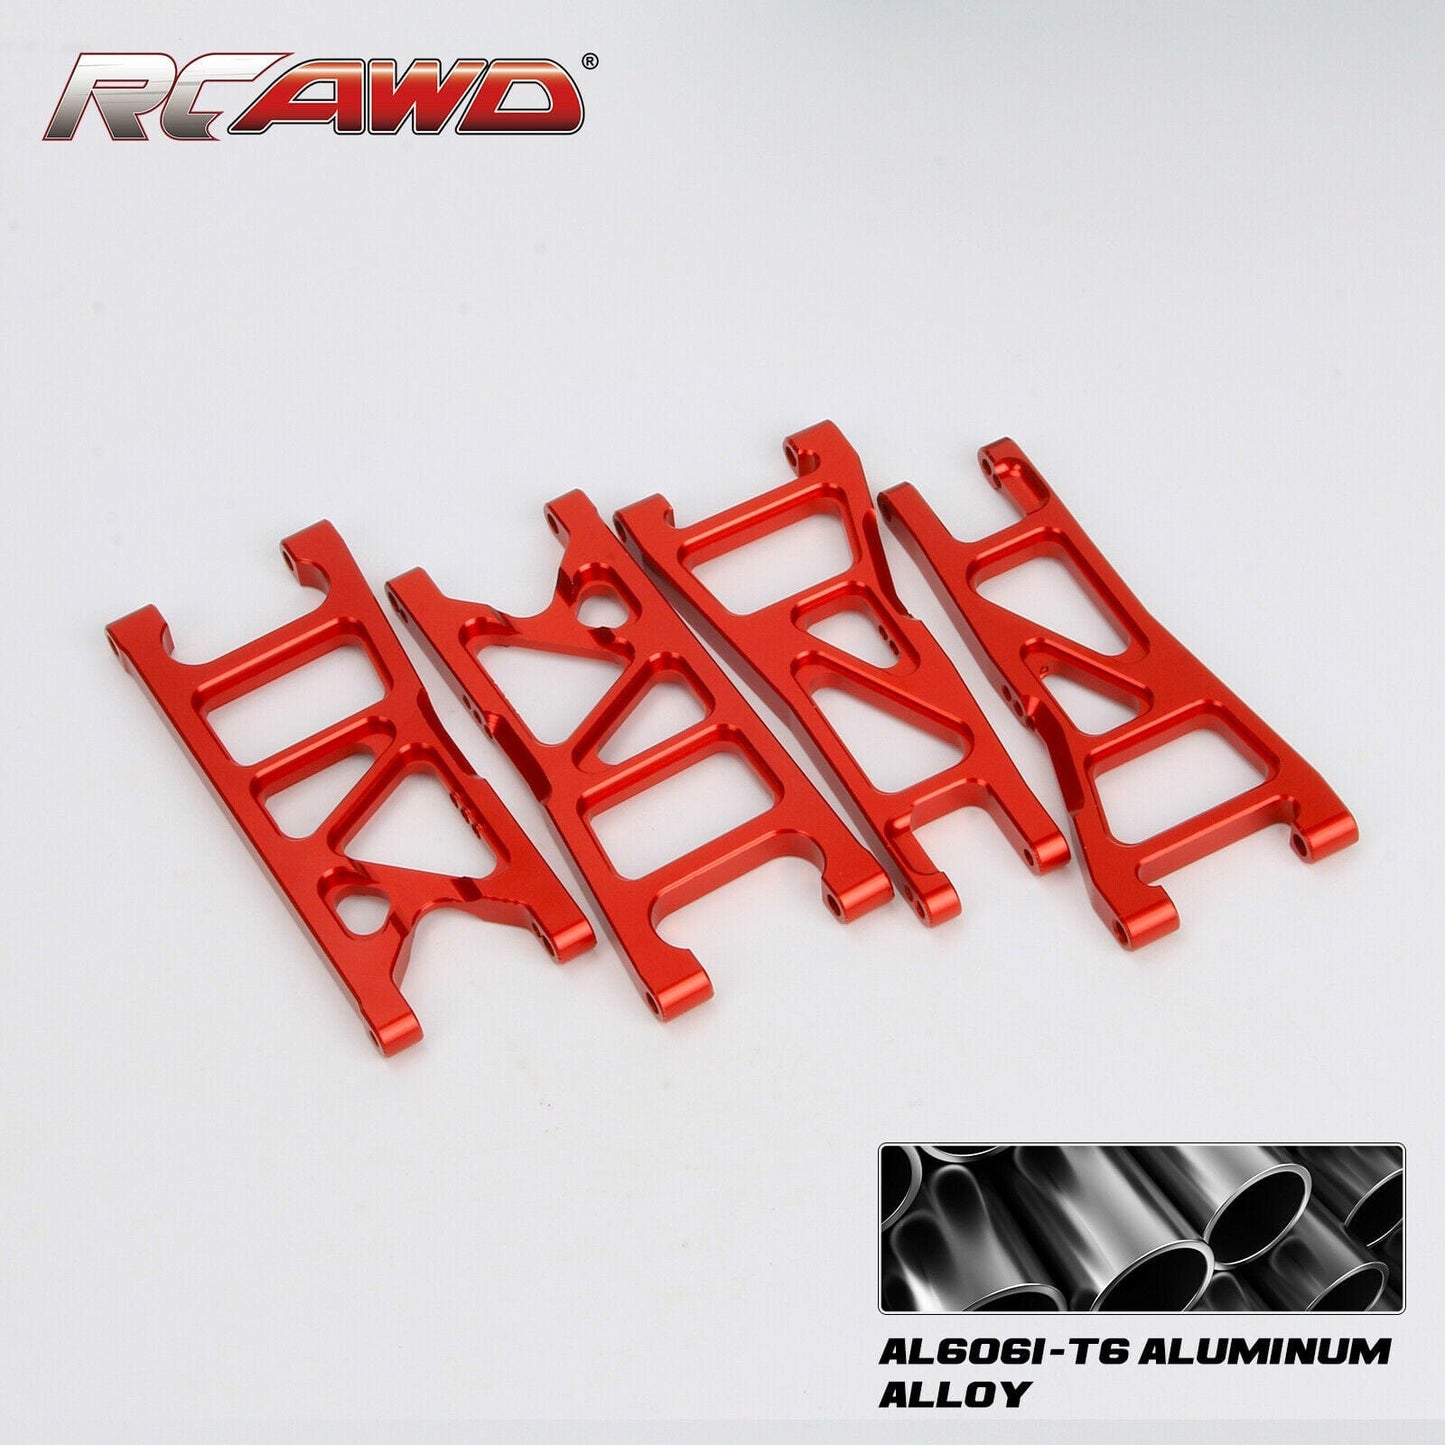 RCAWD ARRMA UPGRADE PARTS RCAWD AR330540 AR330543 rear front suspension arms for arrma Typhon 3S BLX MEAG